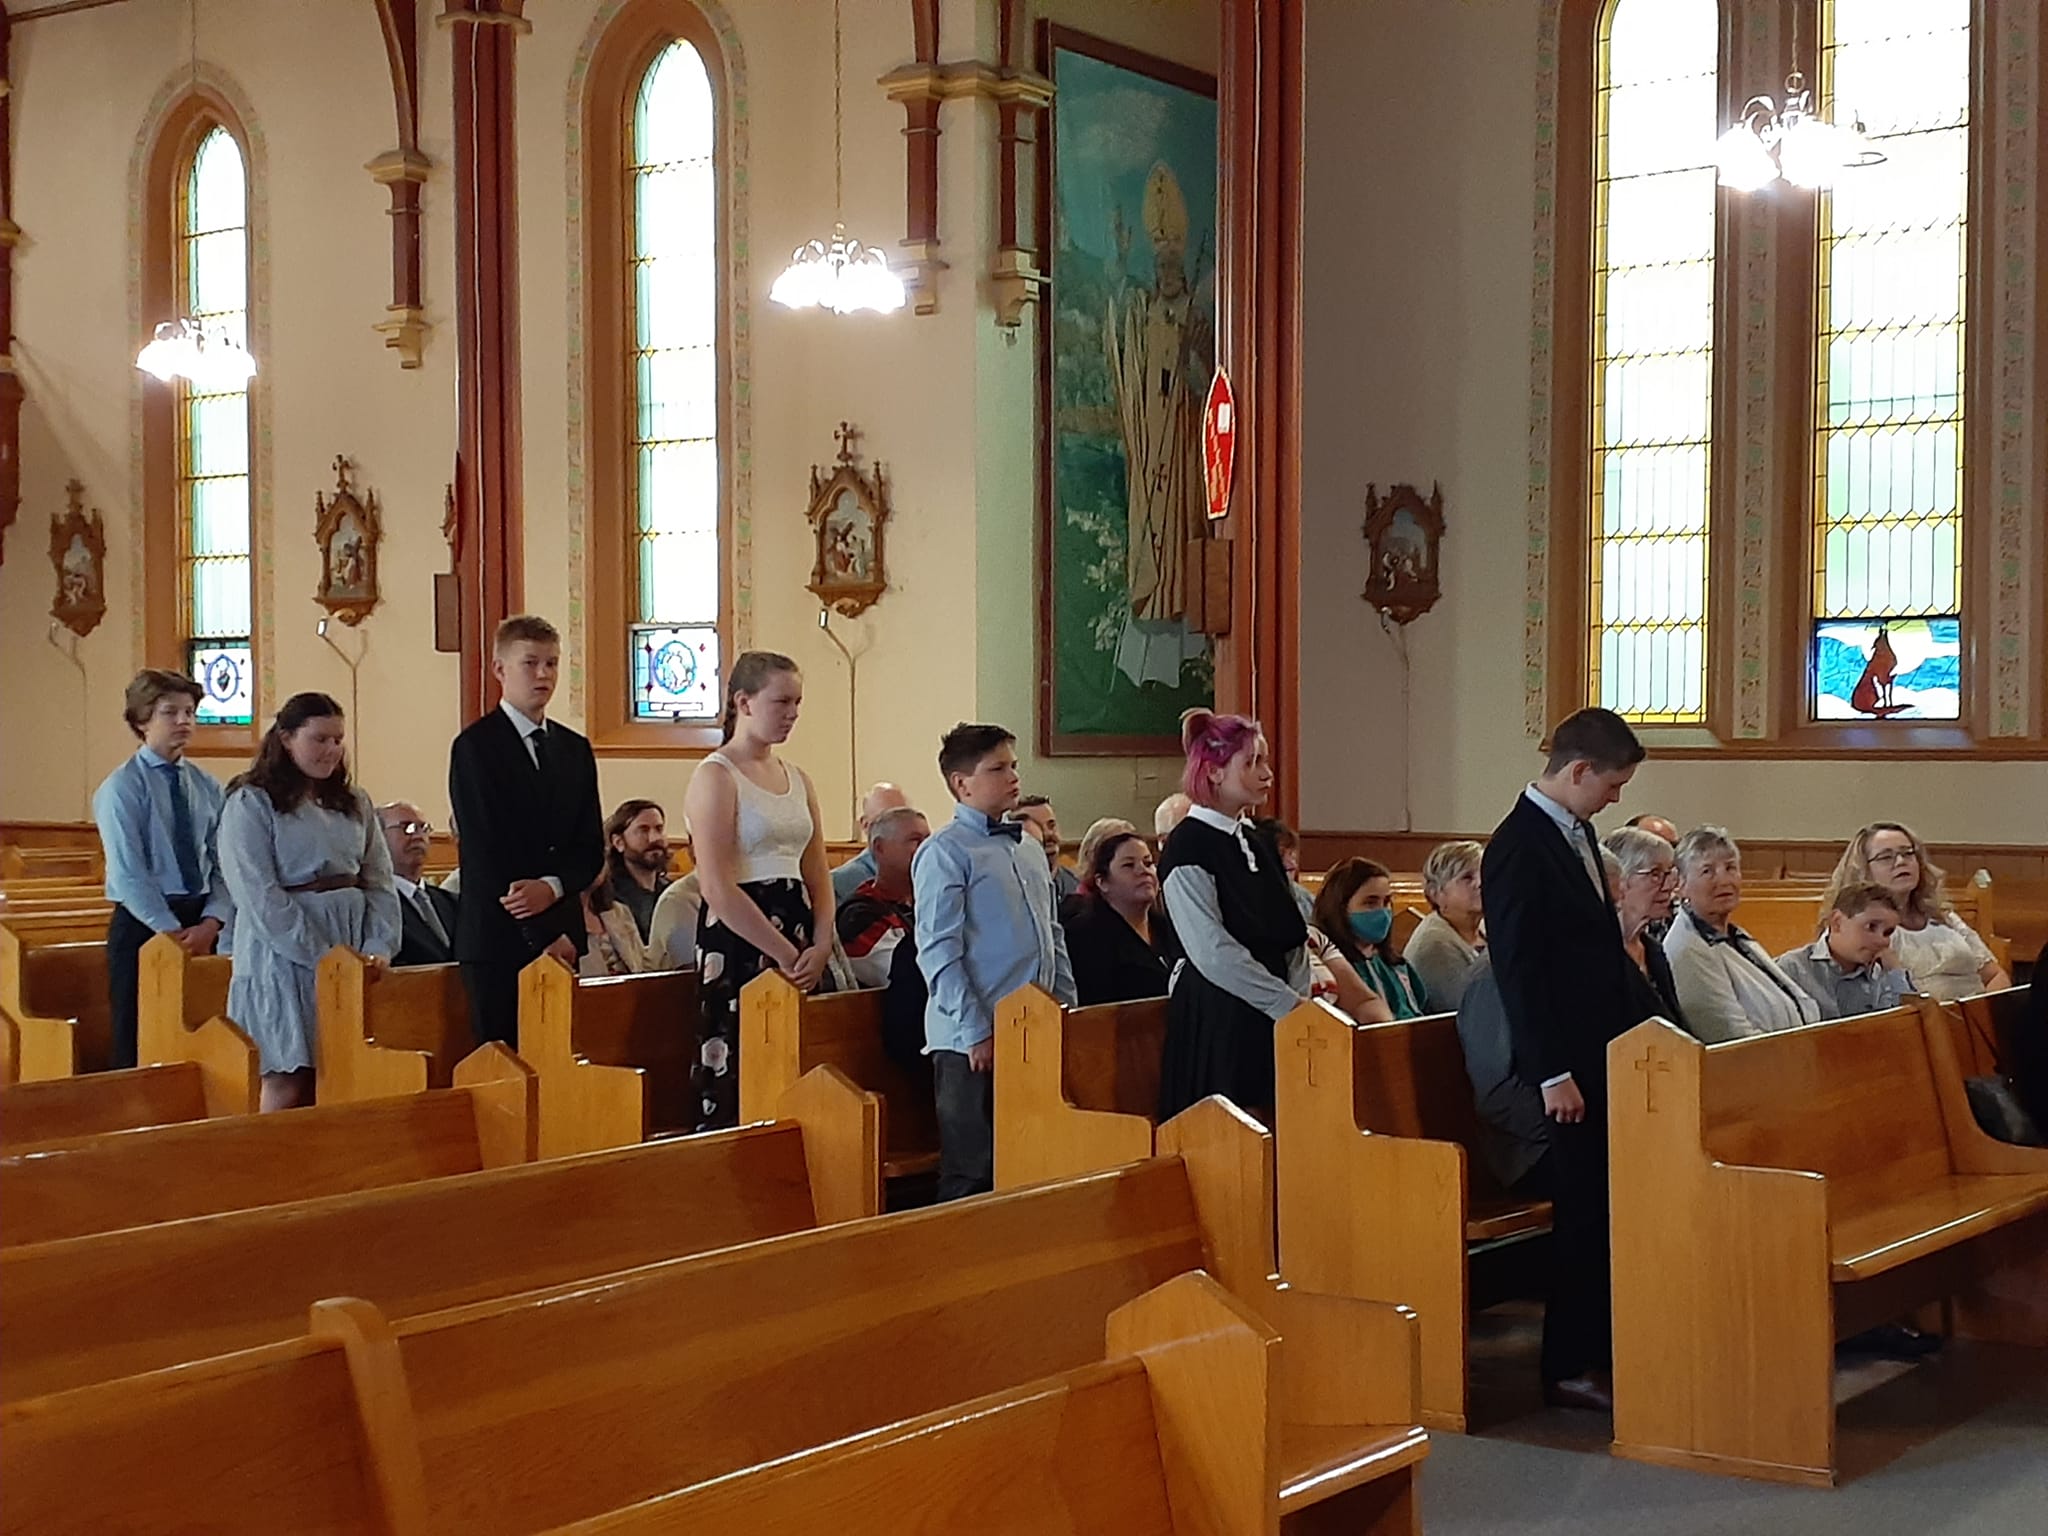 confirmation 2022- children standing in pews renewing baptismal promises